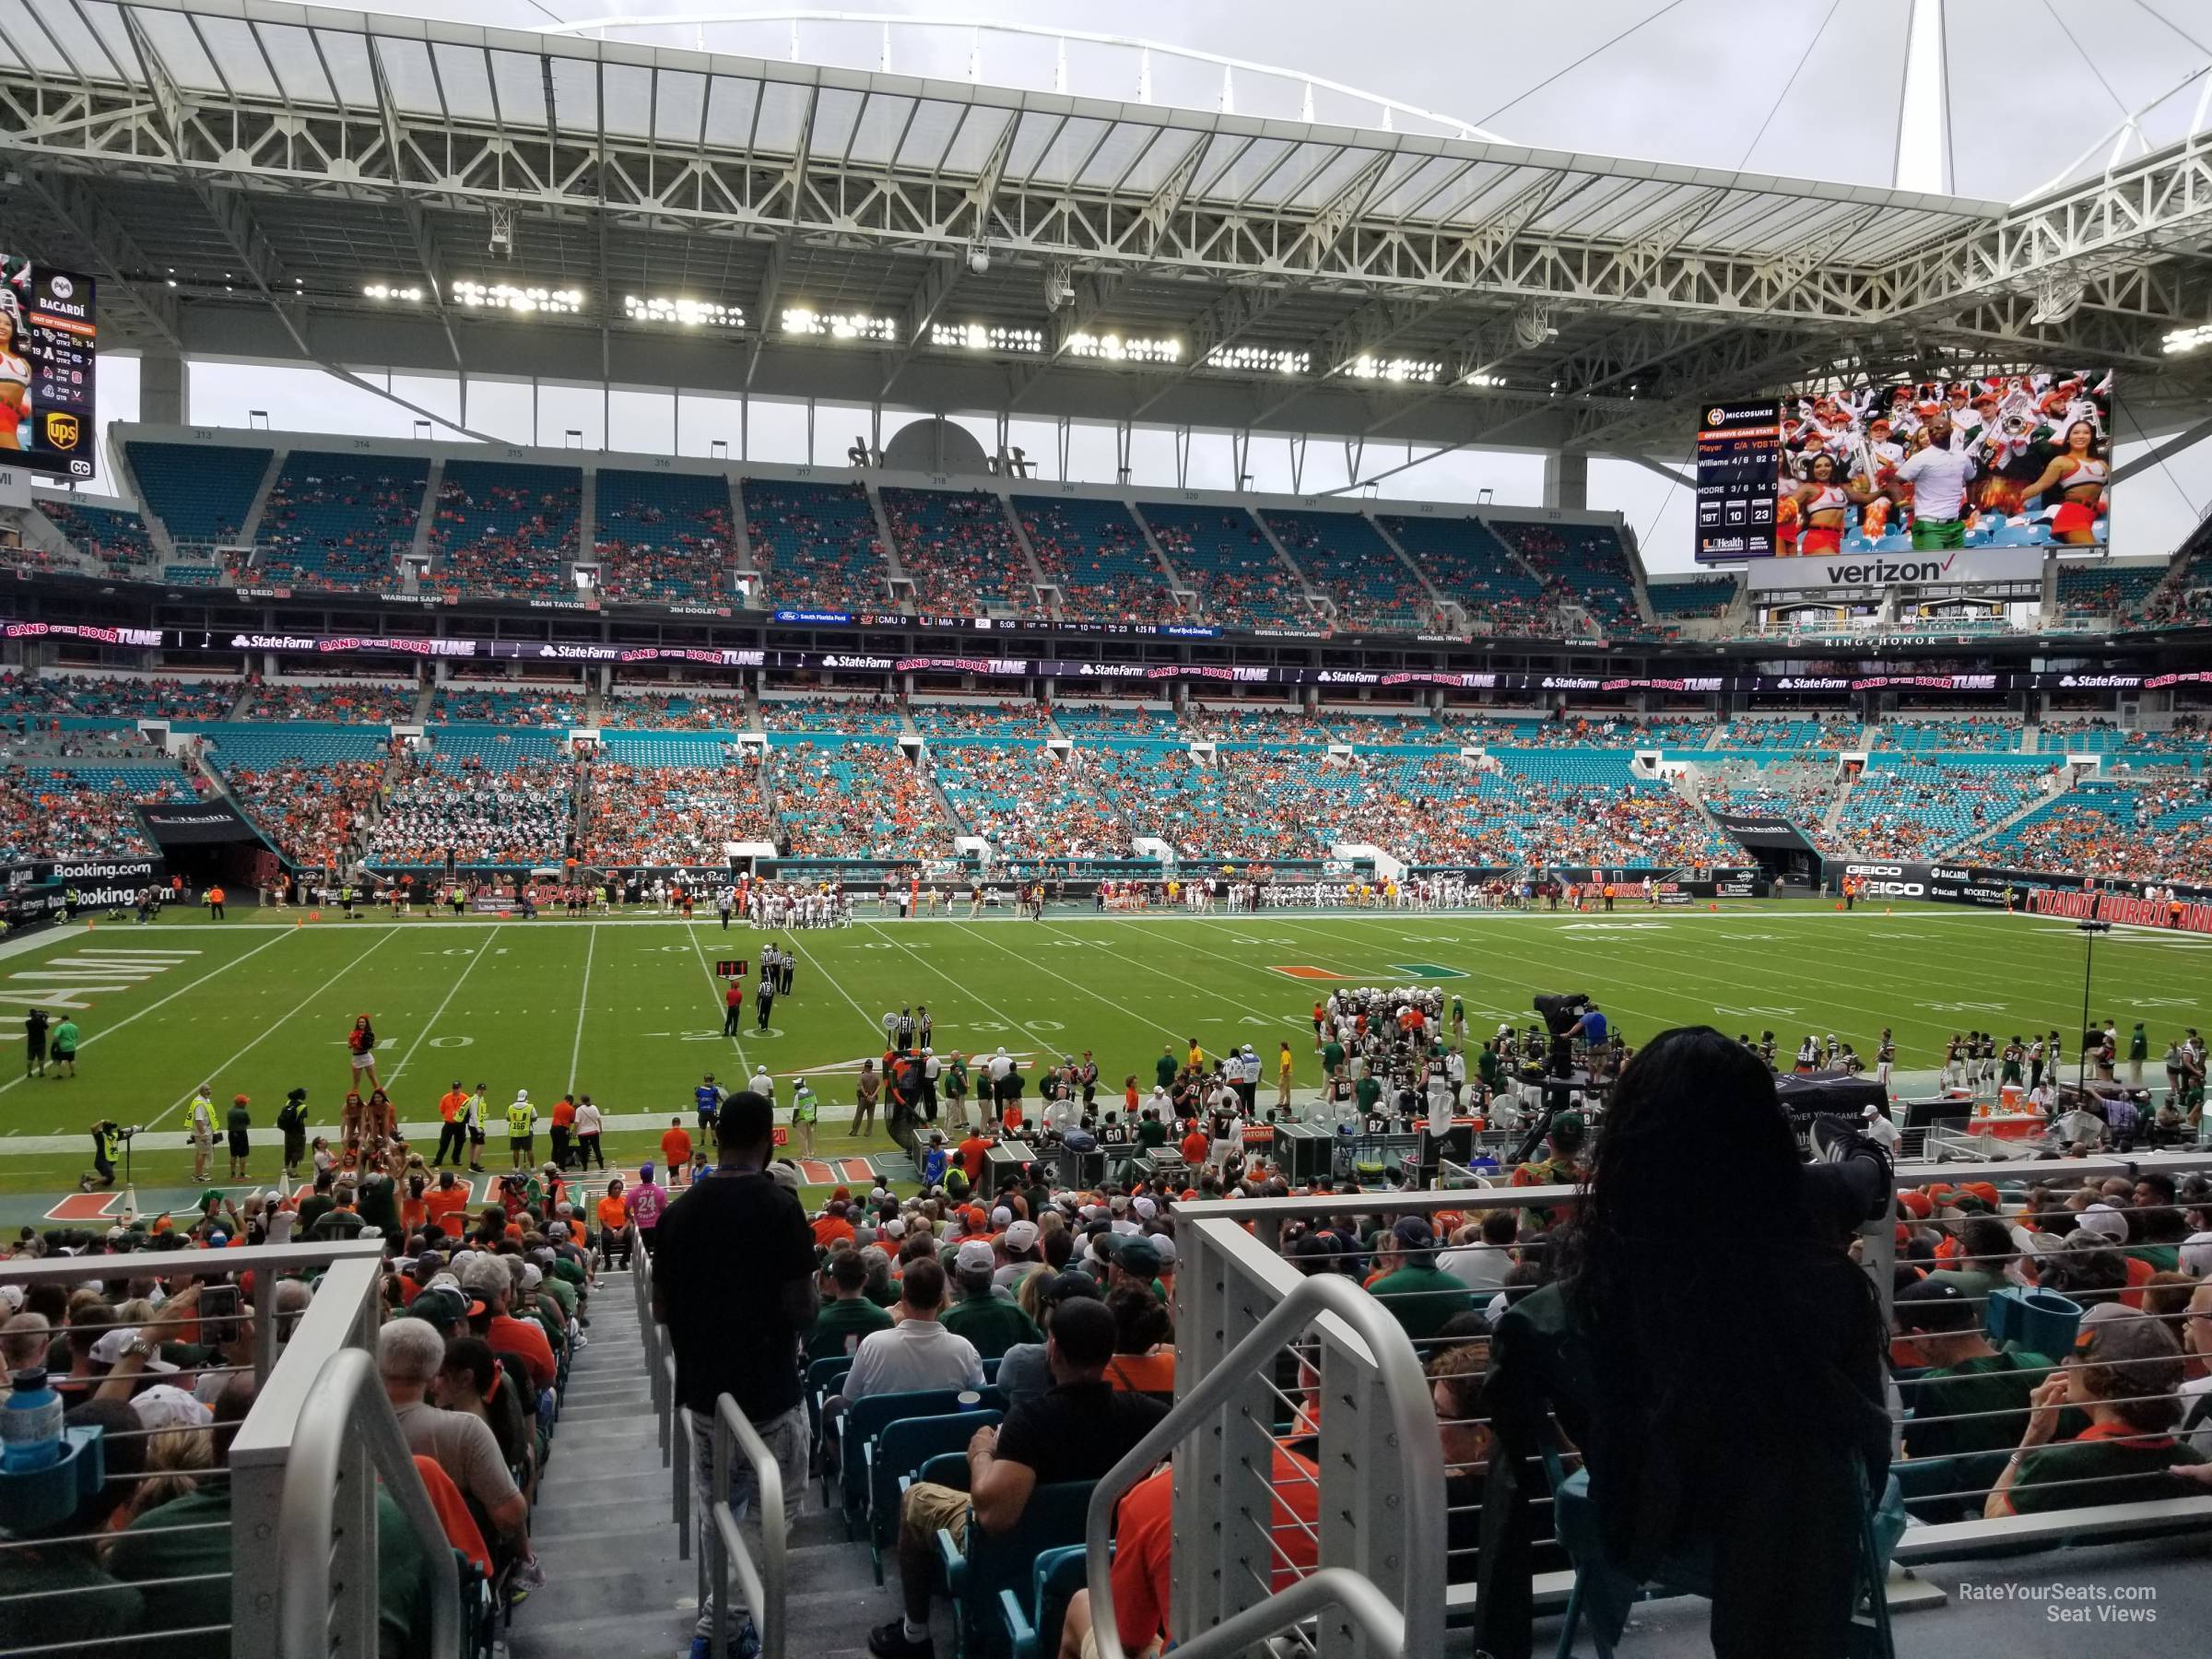 section 149, row 28 seat view  for football - hard rock stadium